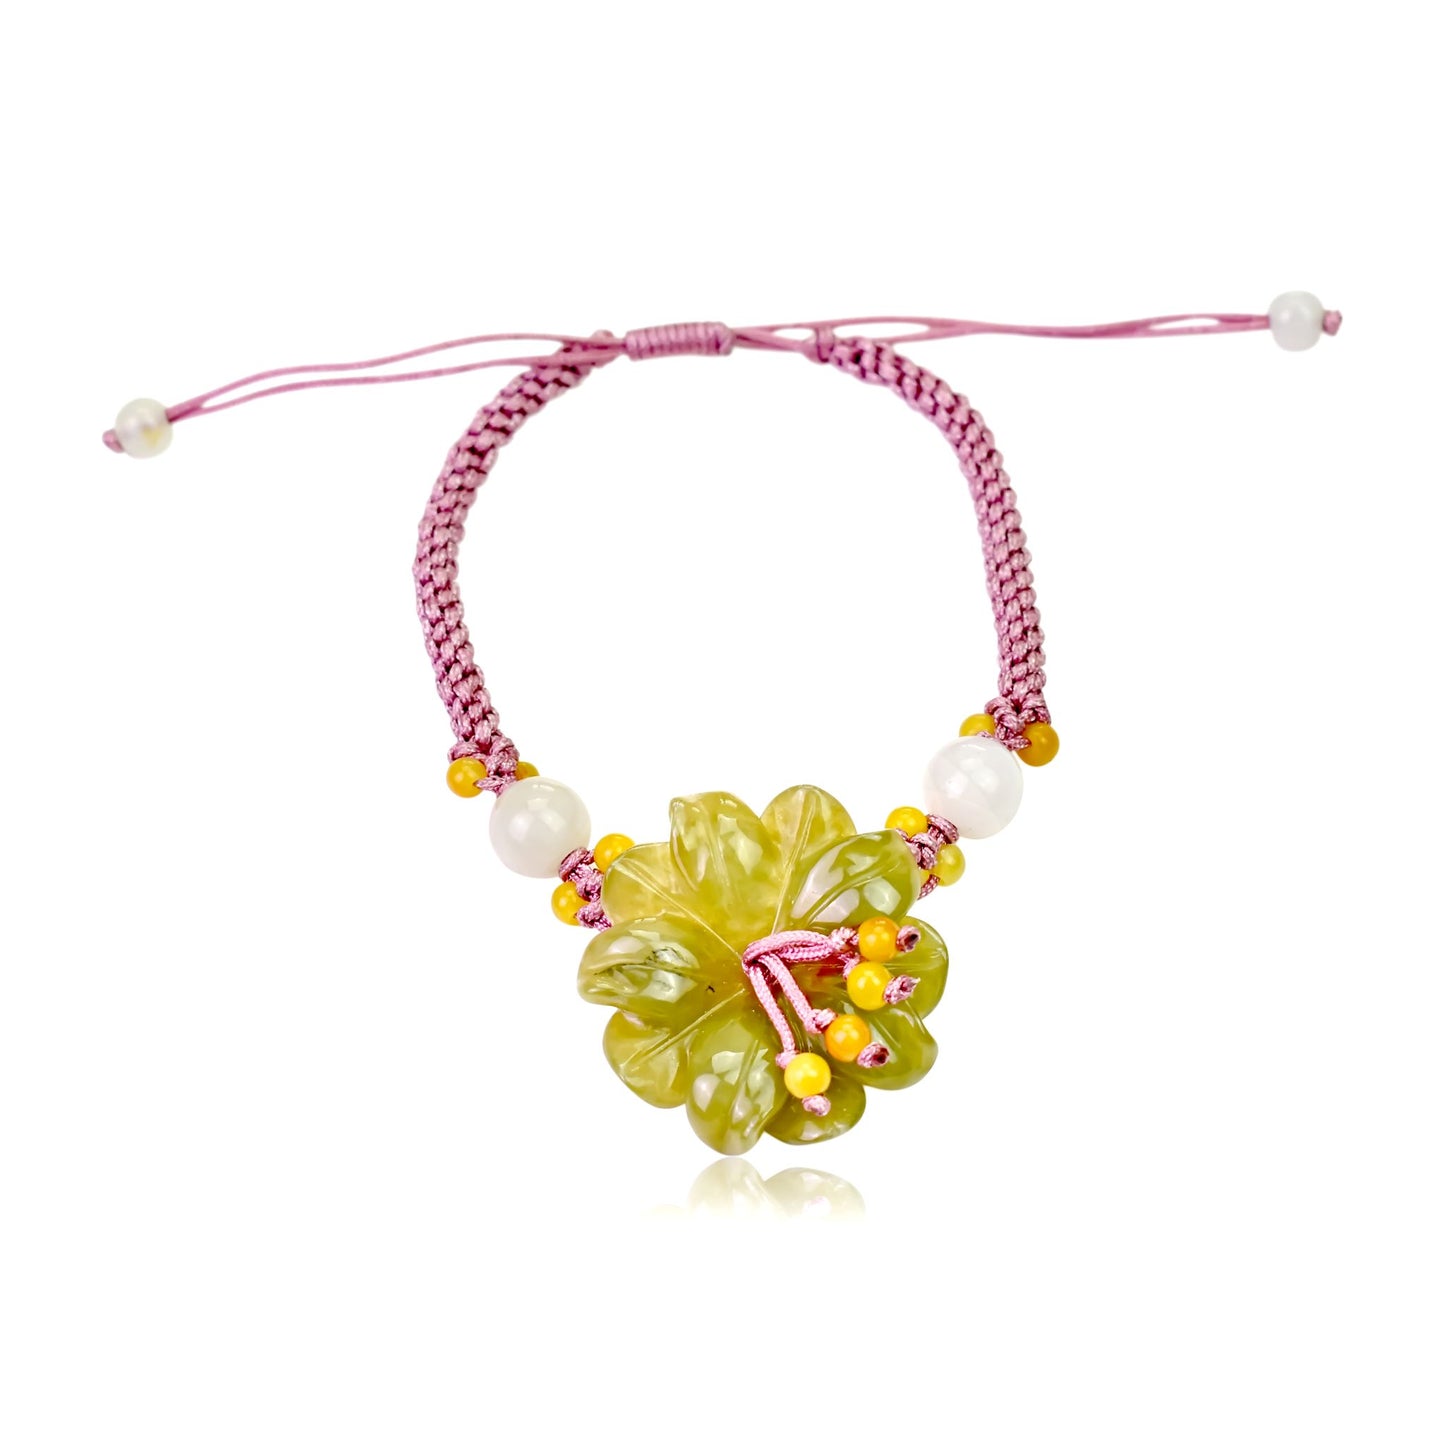 Get Ready to be a Princess with Anemone Jade Adjustable Charm Bracelet made with Lavender Cord